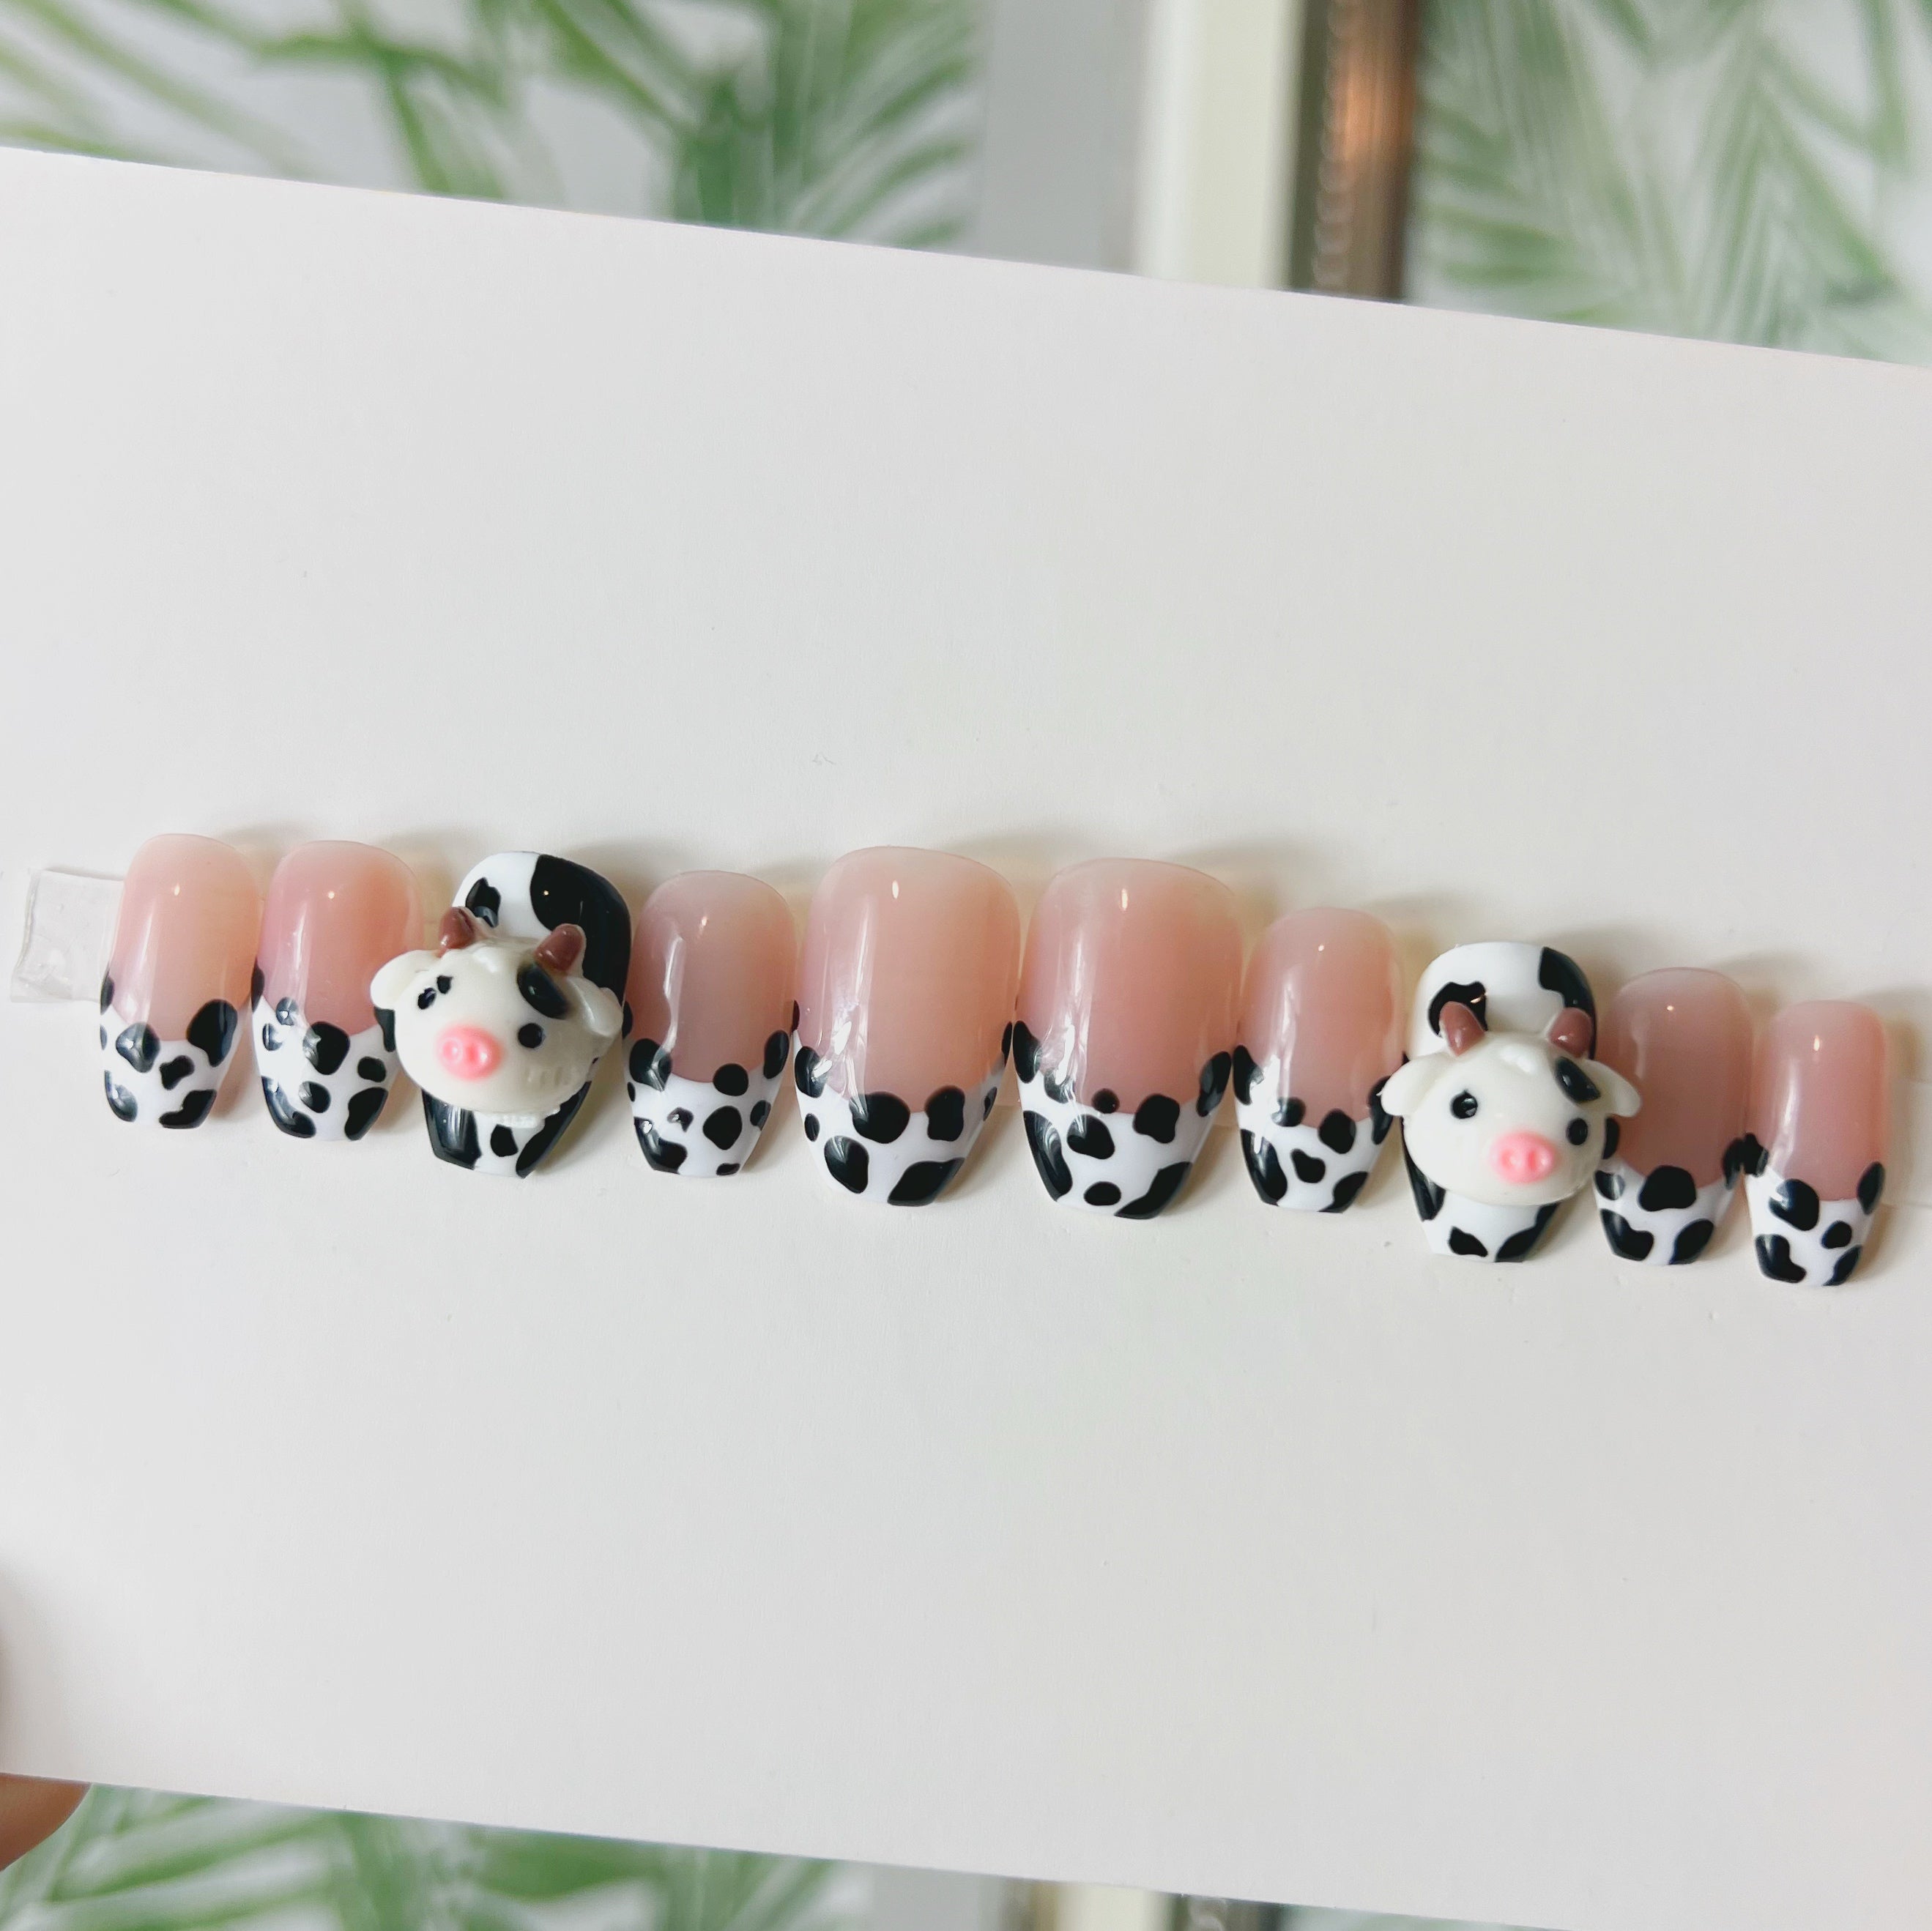 Cow Print Inspired Nail Art Is Instagram's Hottest Beauty TrendHelloGiggles